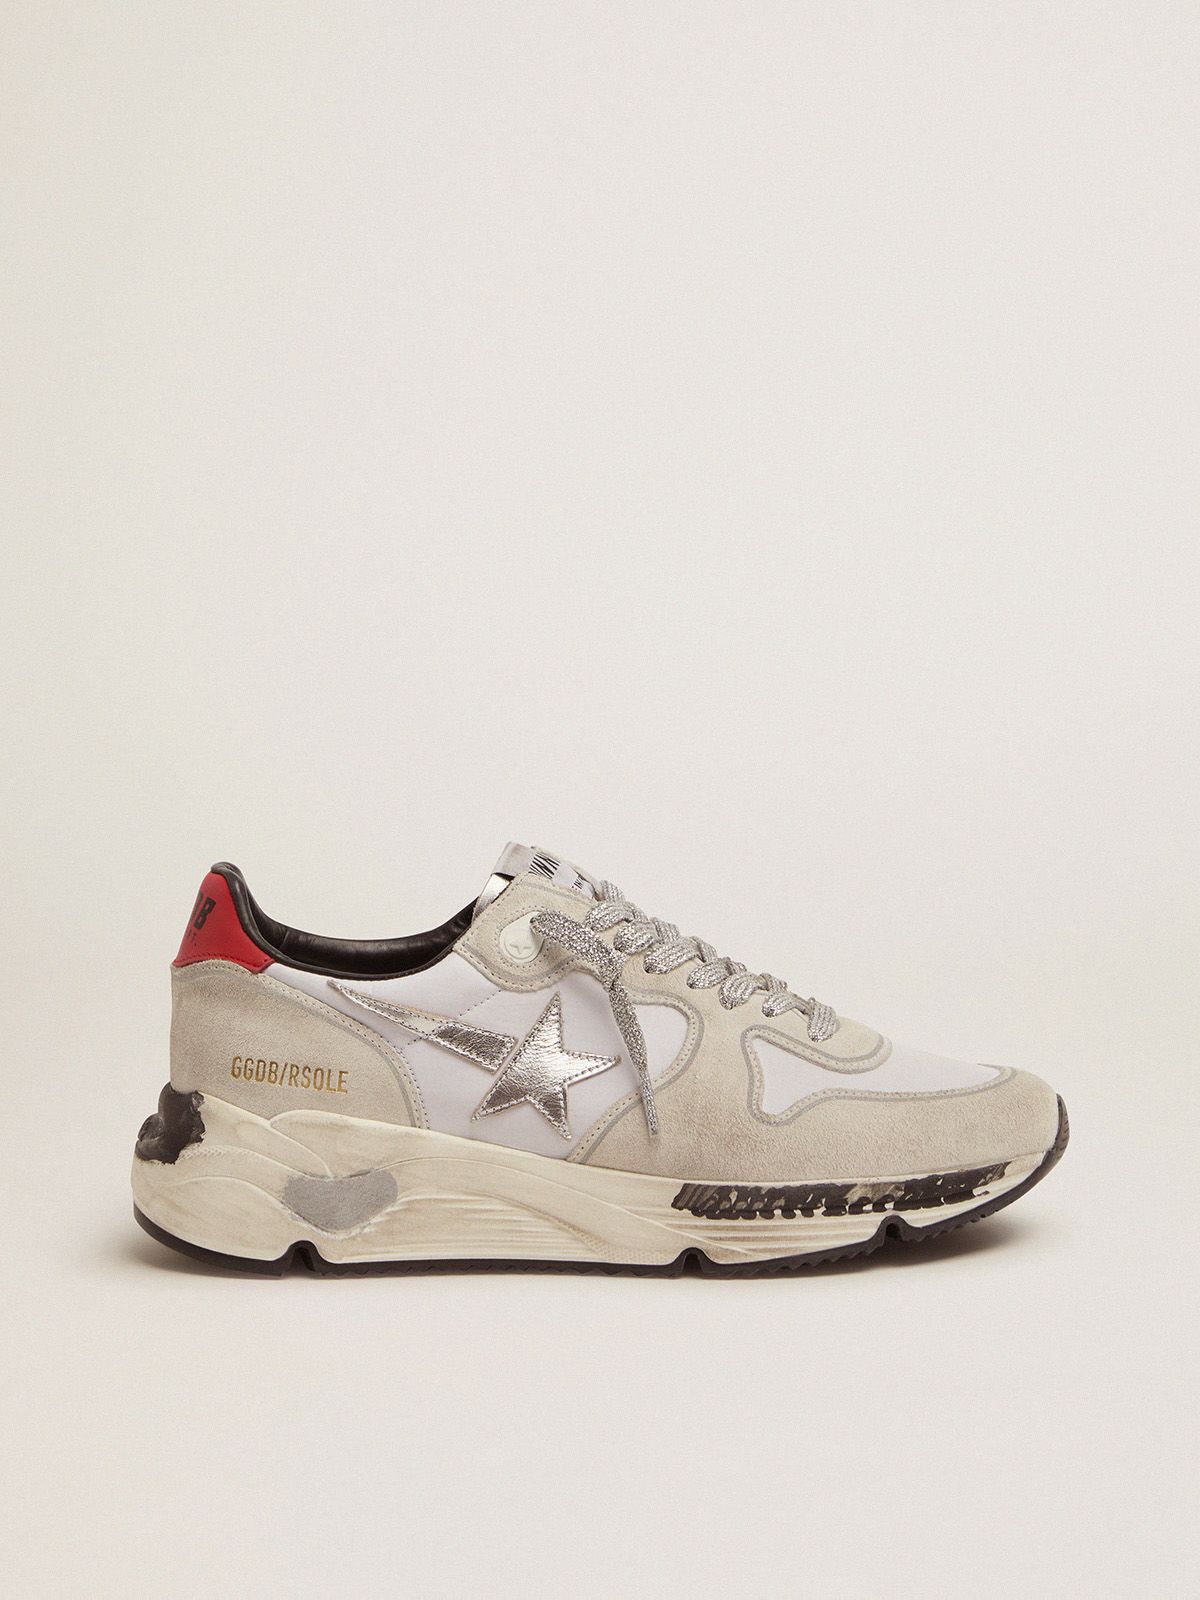 Golden Goose Ball Star Uomo Running Sole sneakers with red heel tab and silver star